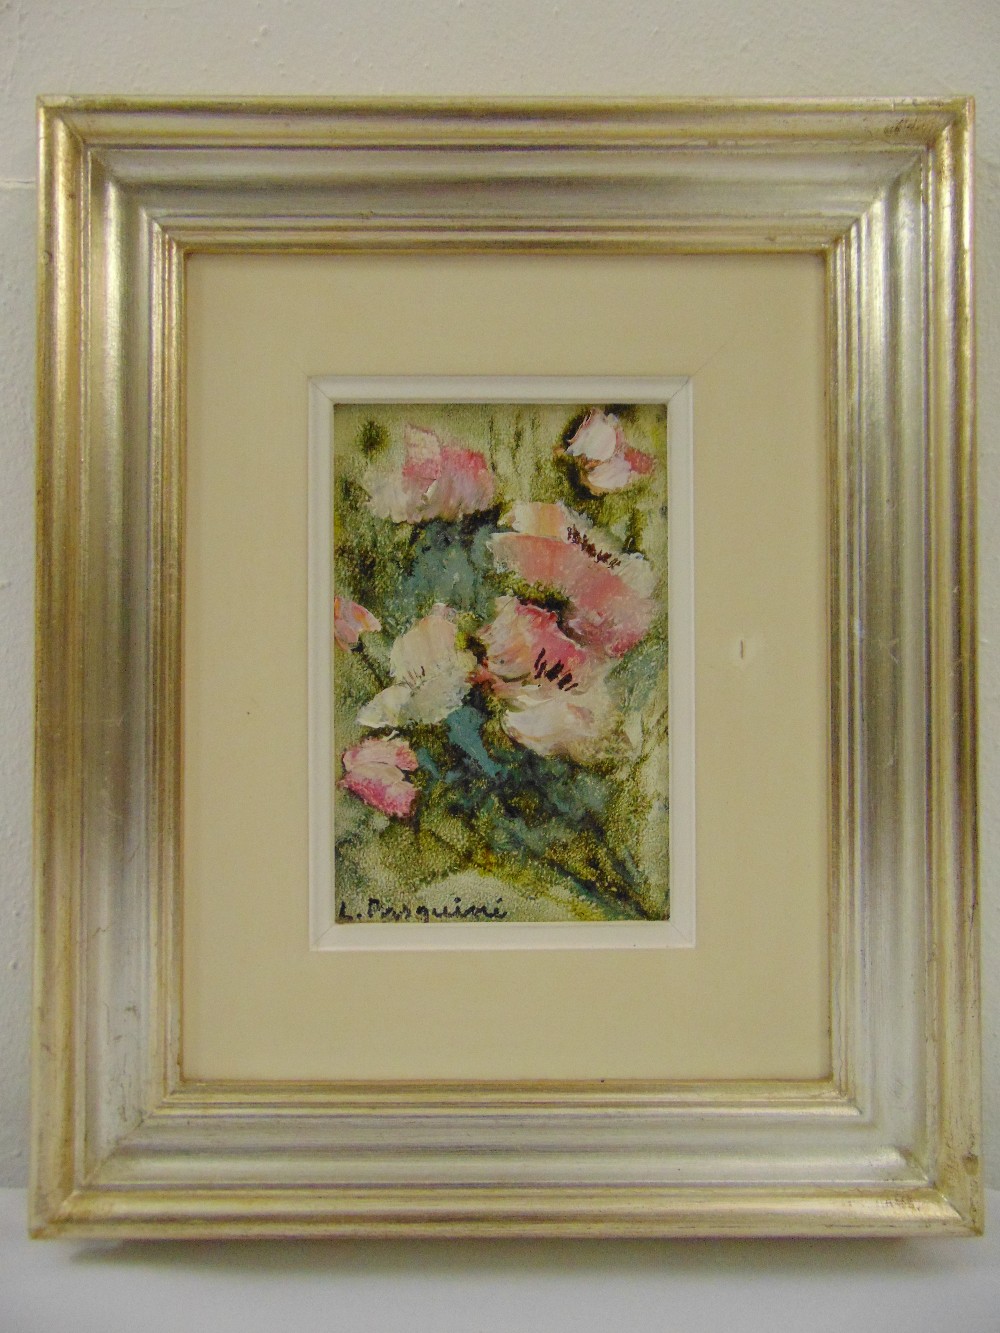 A framed oil on panel of flowers indistinctly signed bottom left, gallery details to verso, 14 x